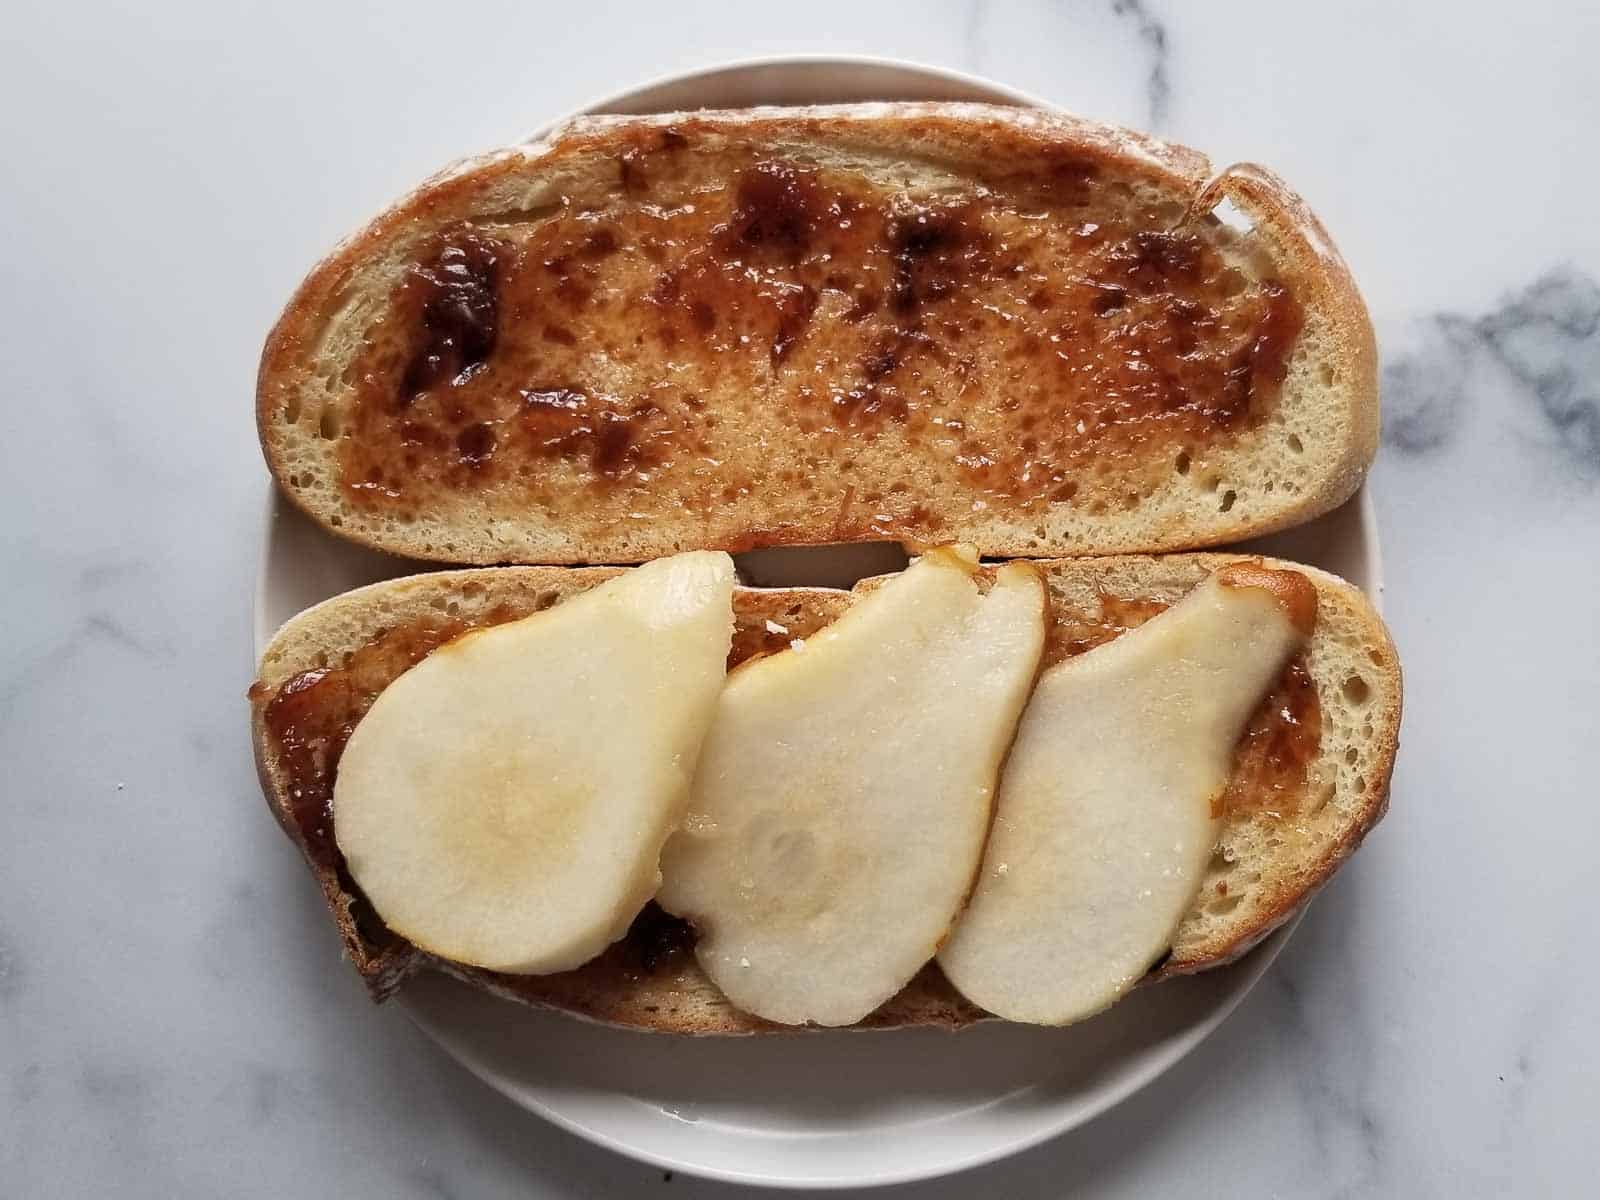 Cut pears on two slices of bread with fig jam.